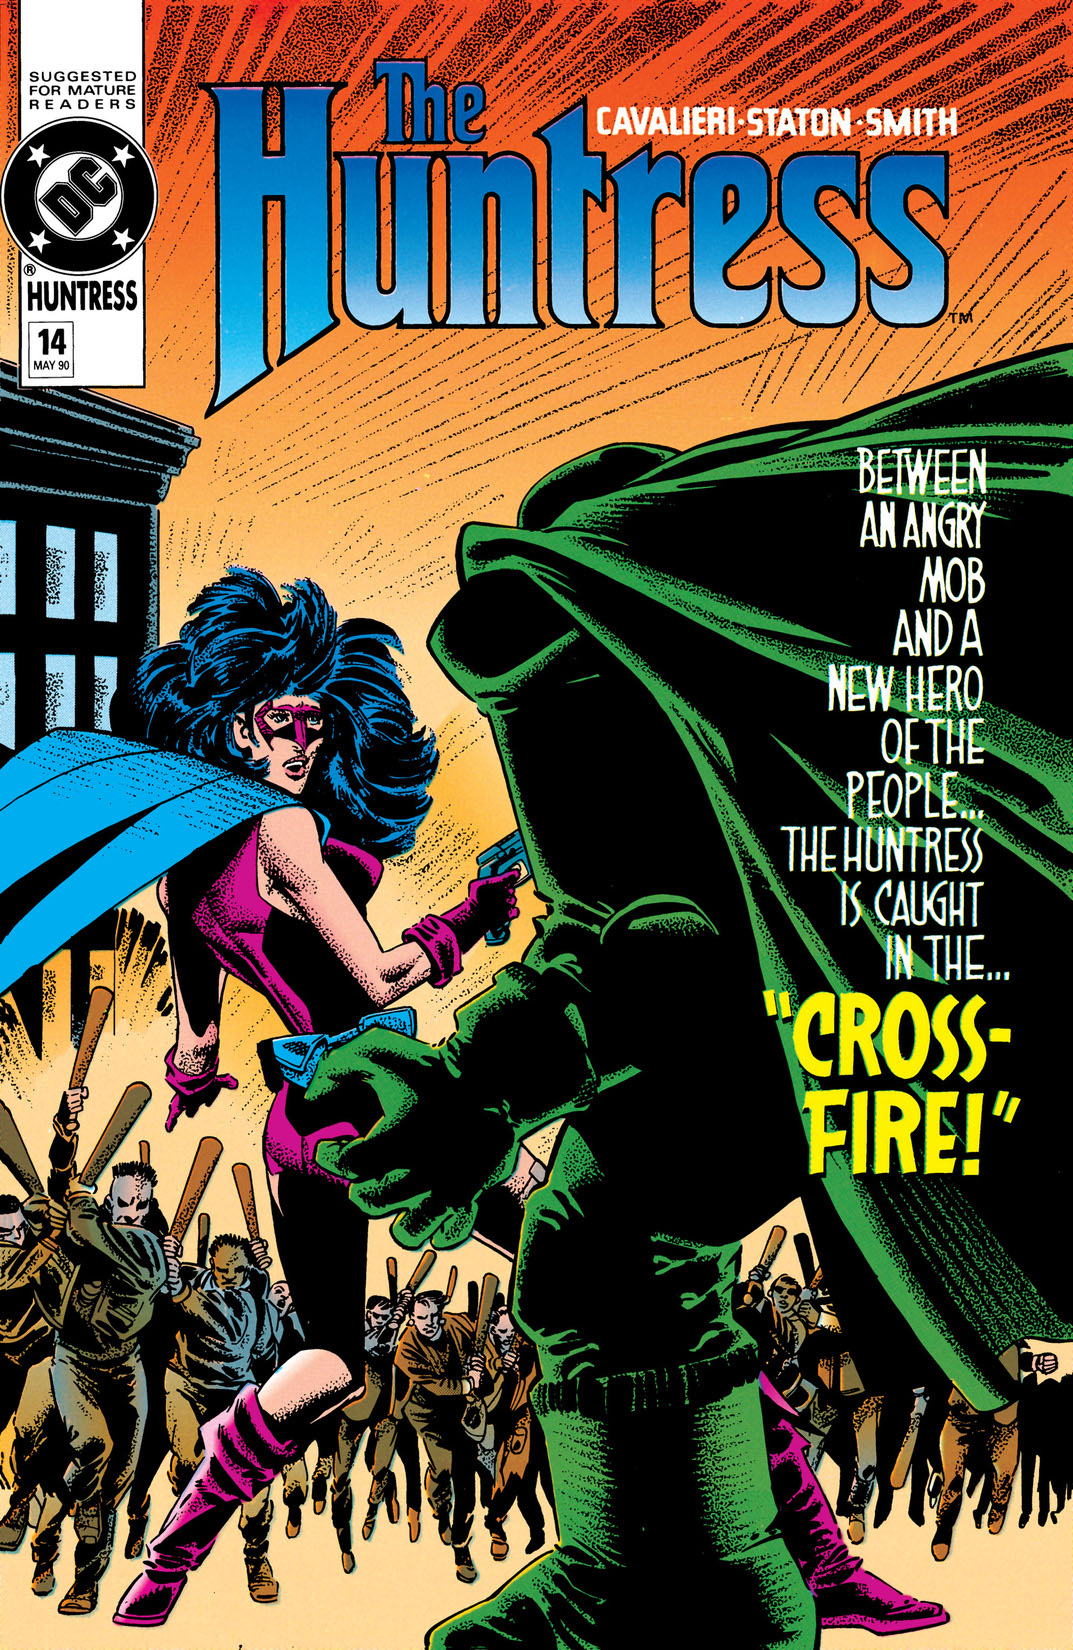 The Huntress (1989-1990) #14 preview images